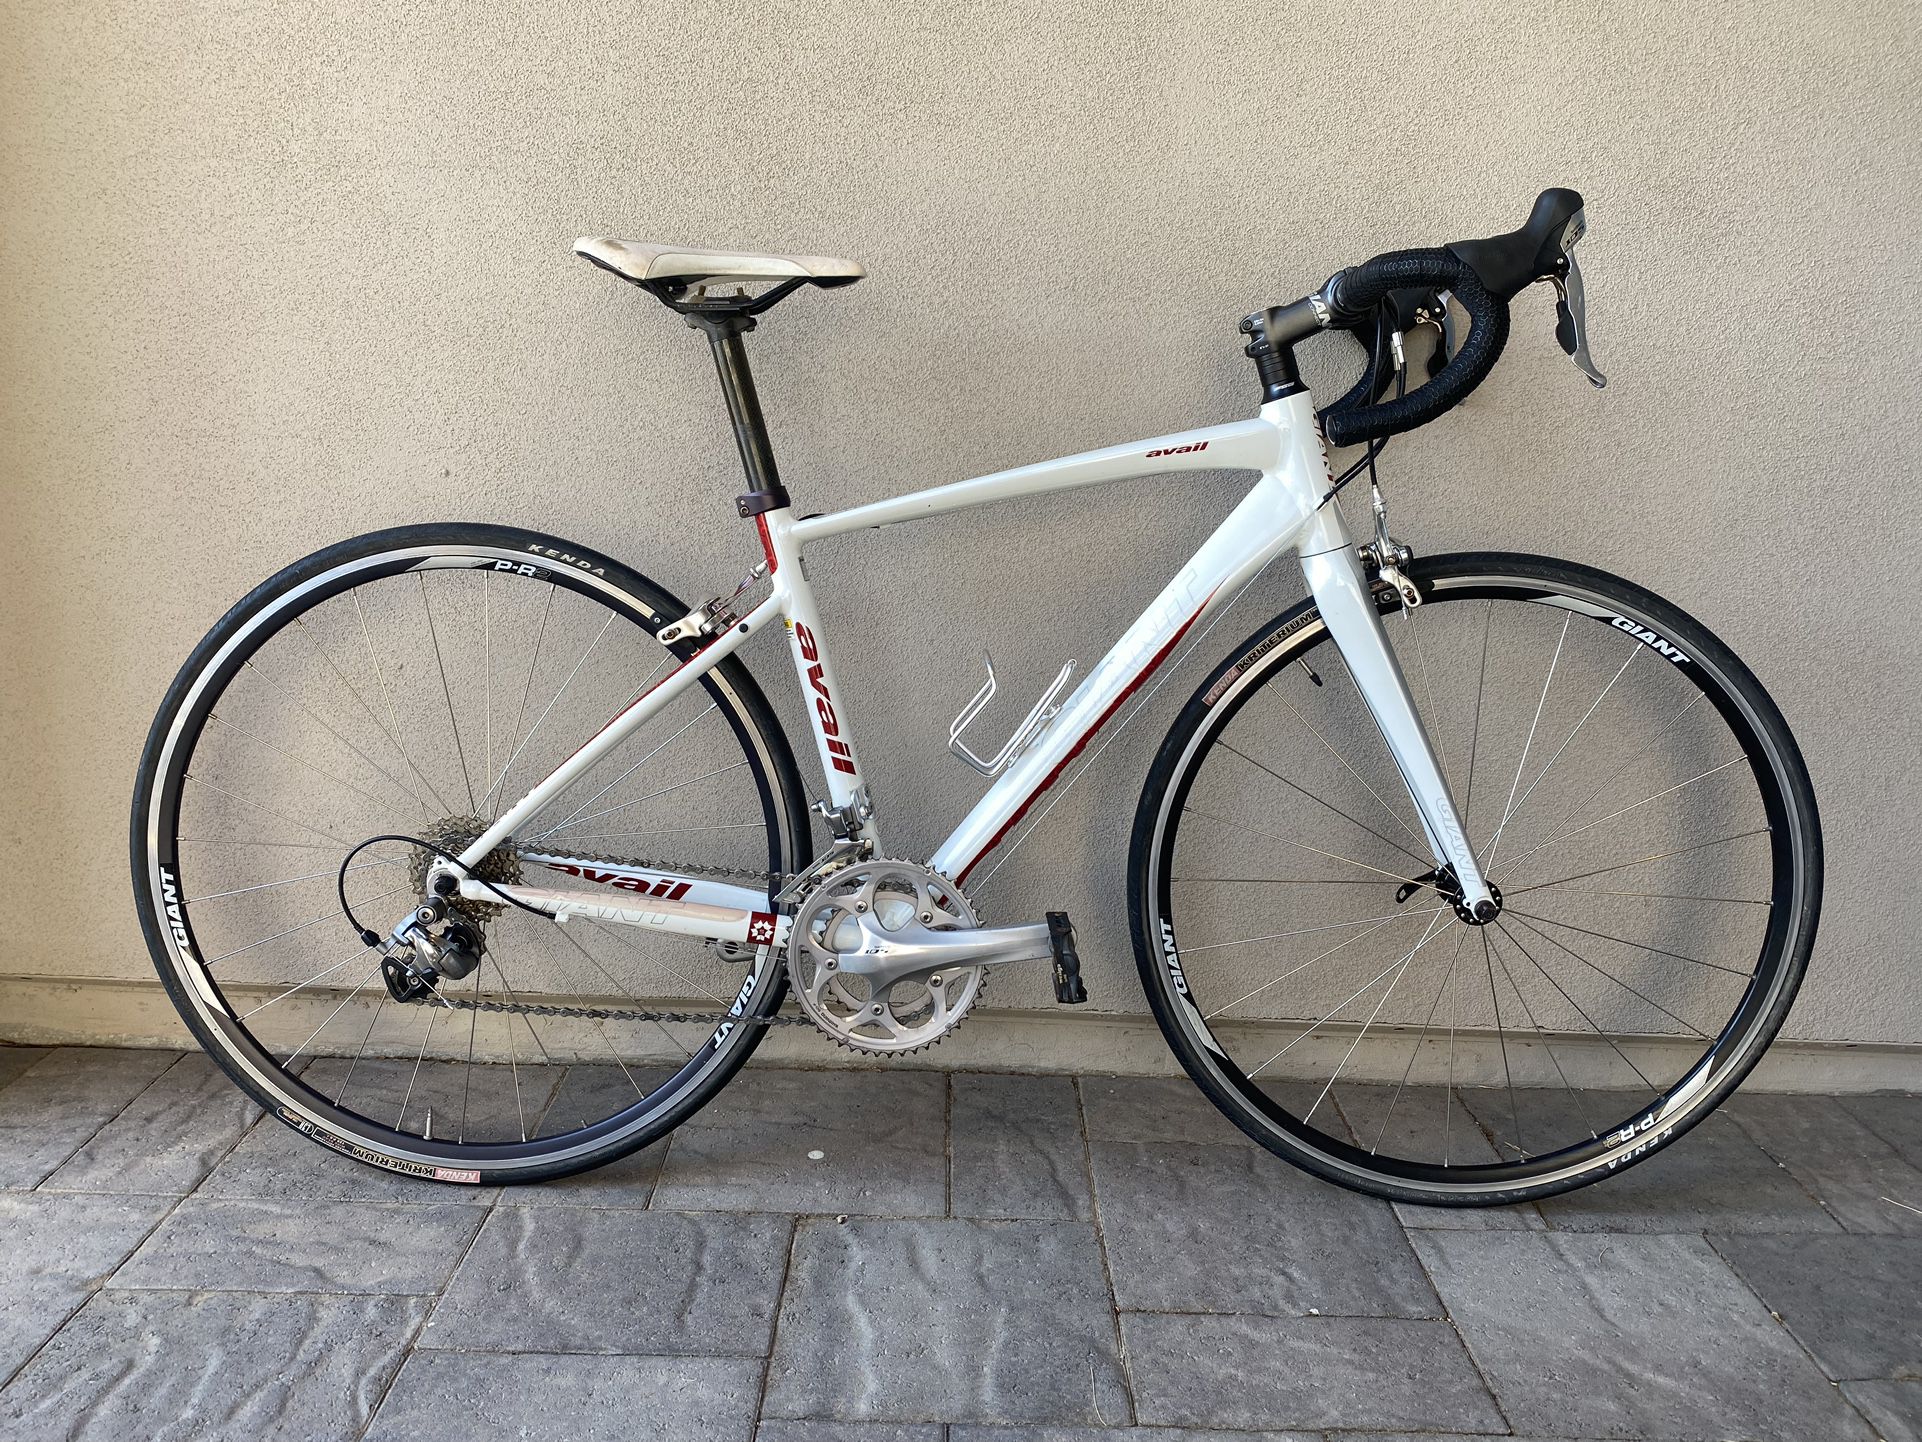 Giant Avail Road Bike w/ Shimano 105, Size Small